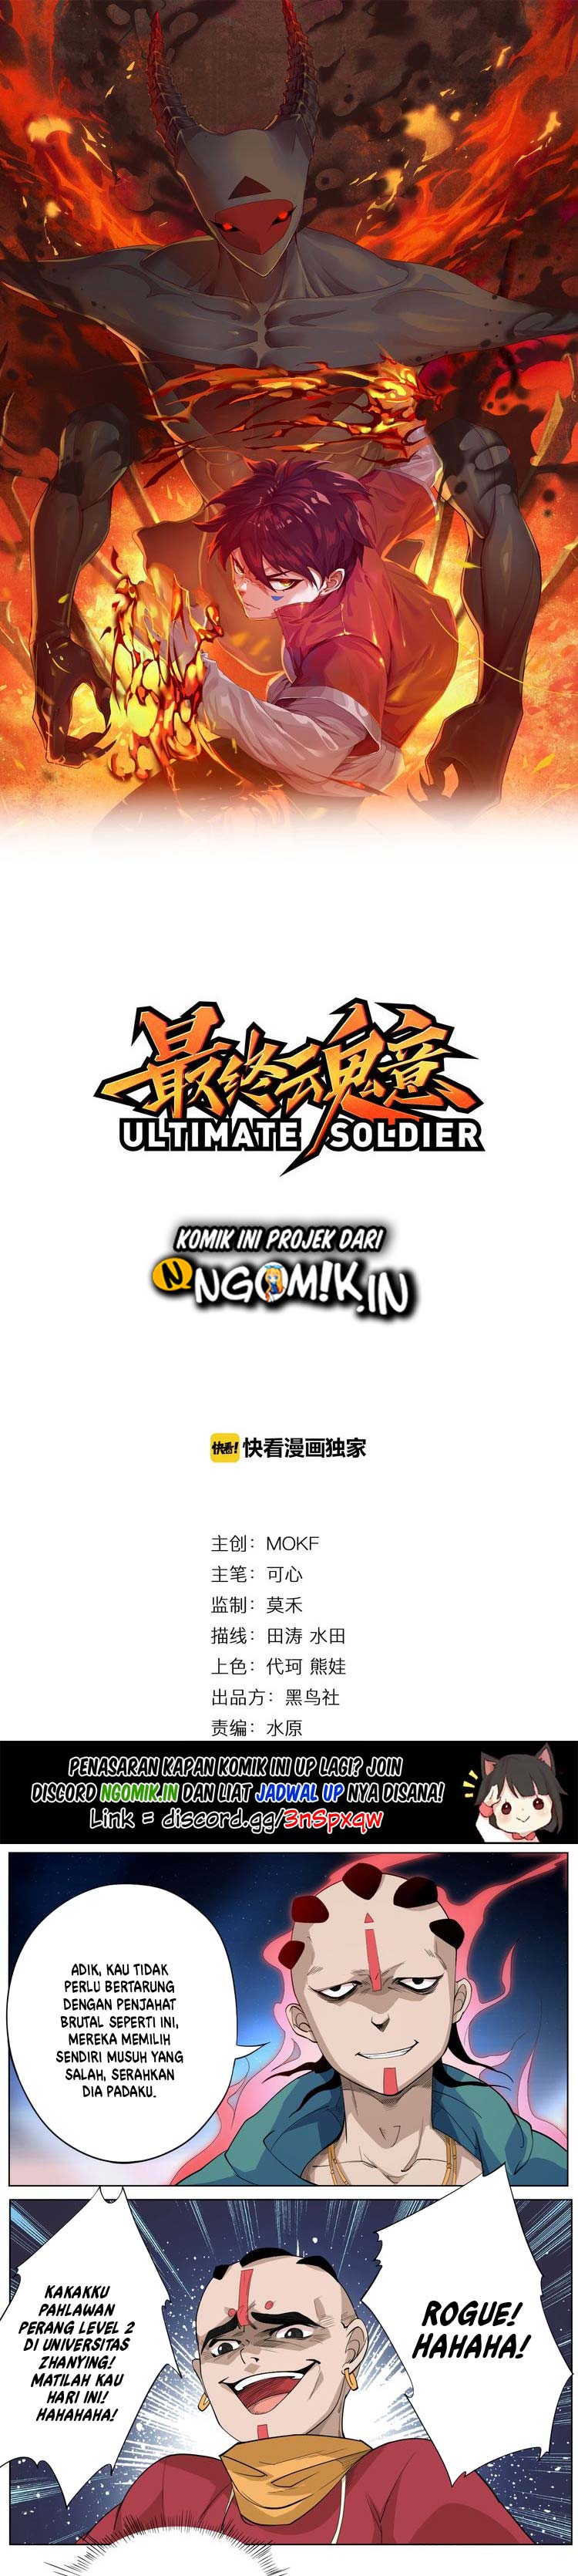 Ultimate Soldier Chapter 02 2